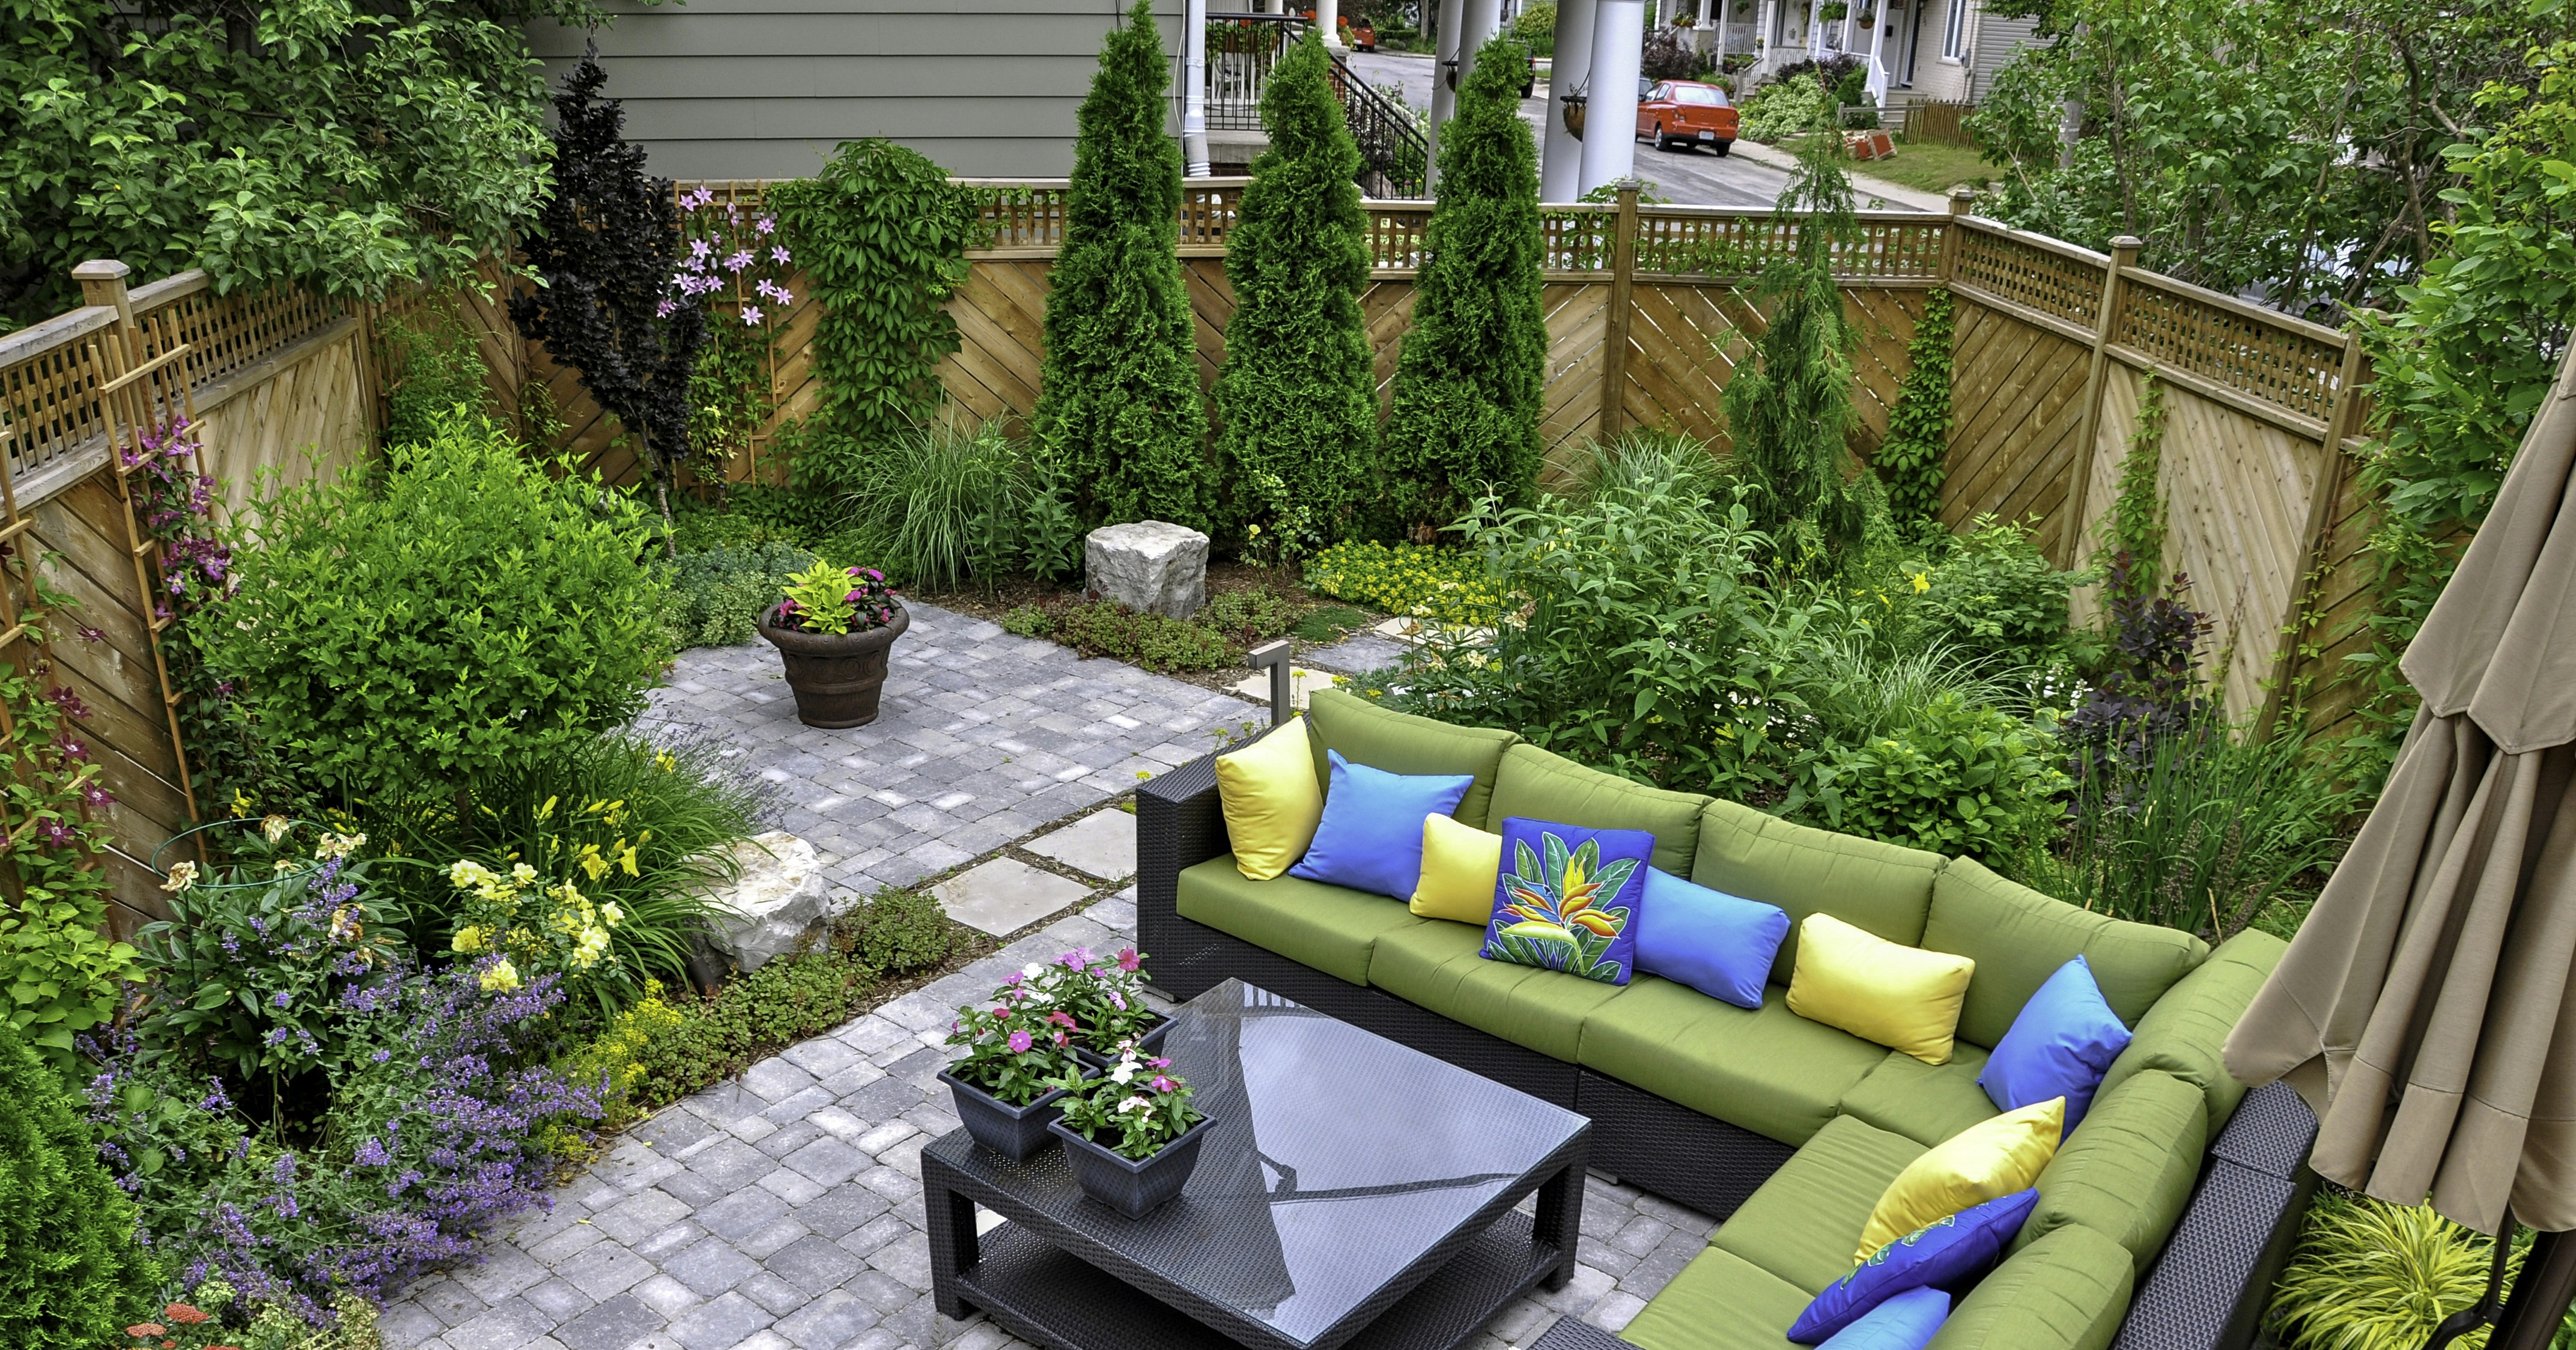 7 Chic Patio Ideas for a Better Backyard